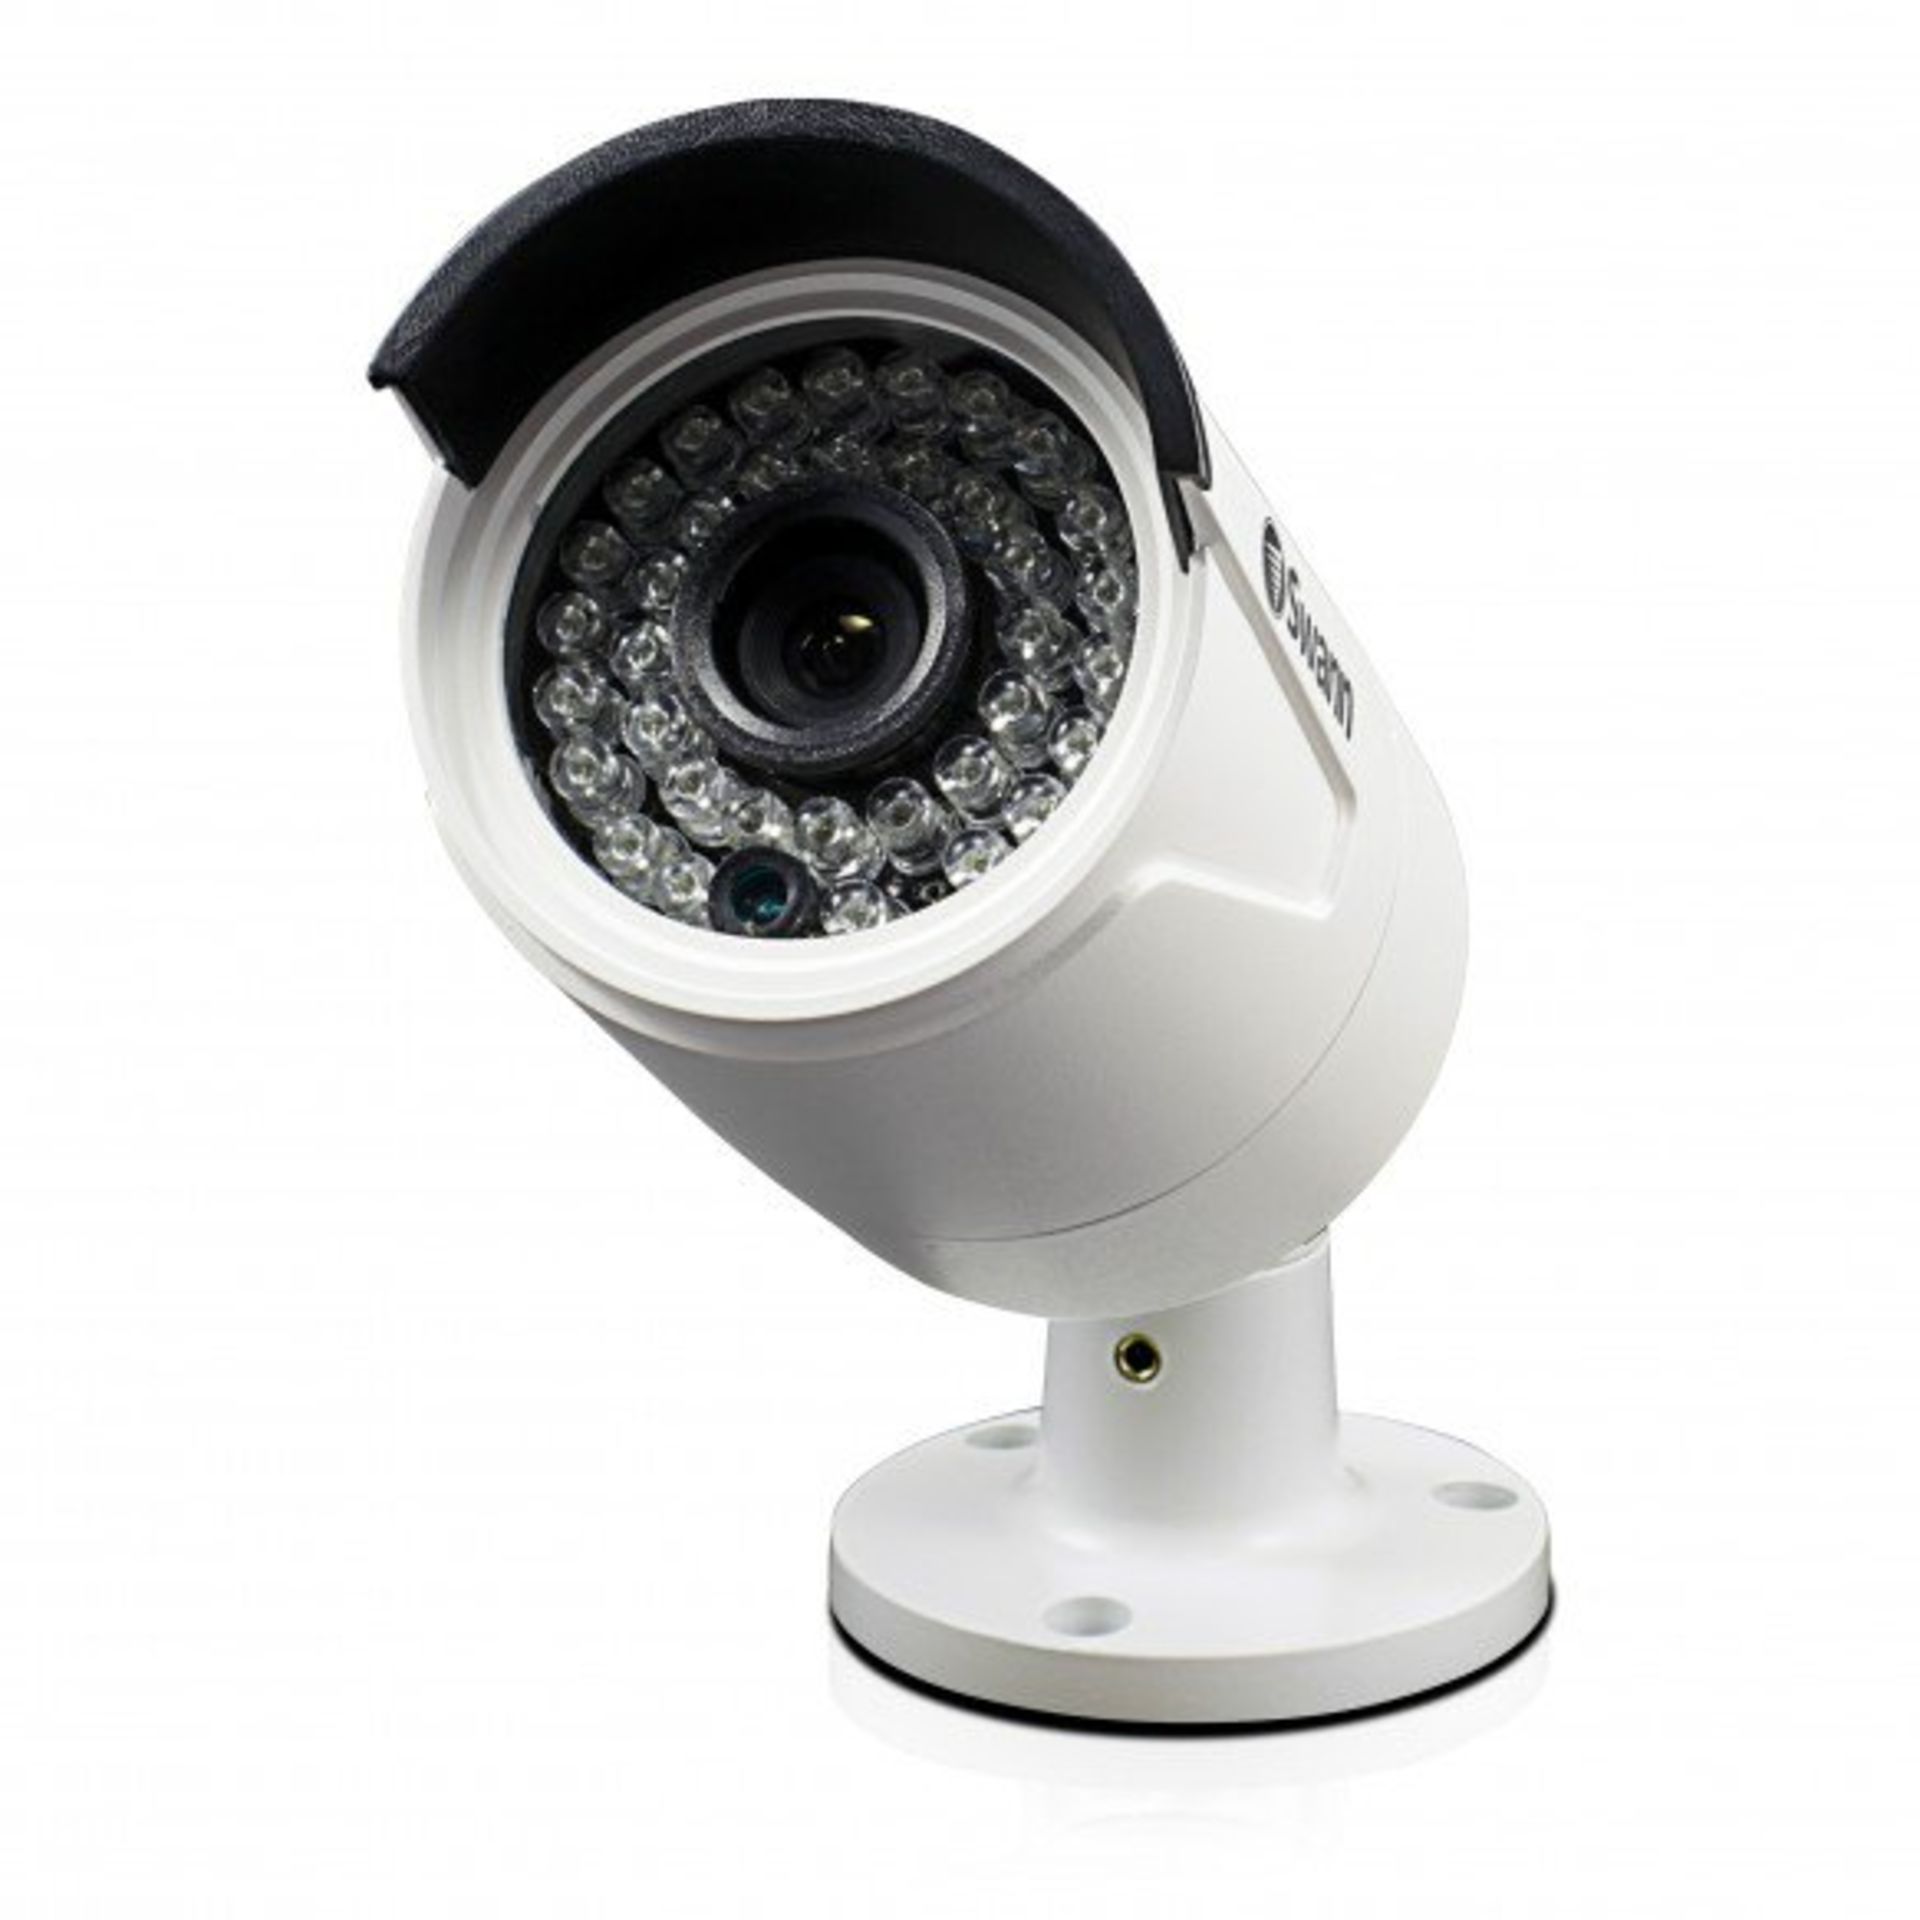 V Grade A Swann 818CAM Super HD Day/Night Security Camera - Night Vision 100ft - IP66 Rated